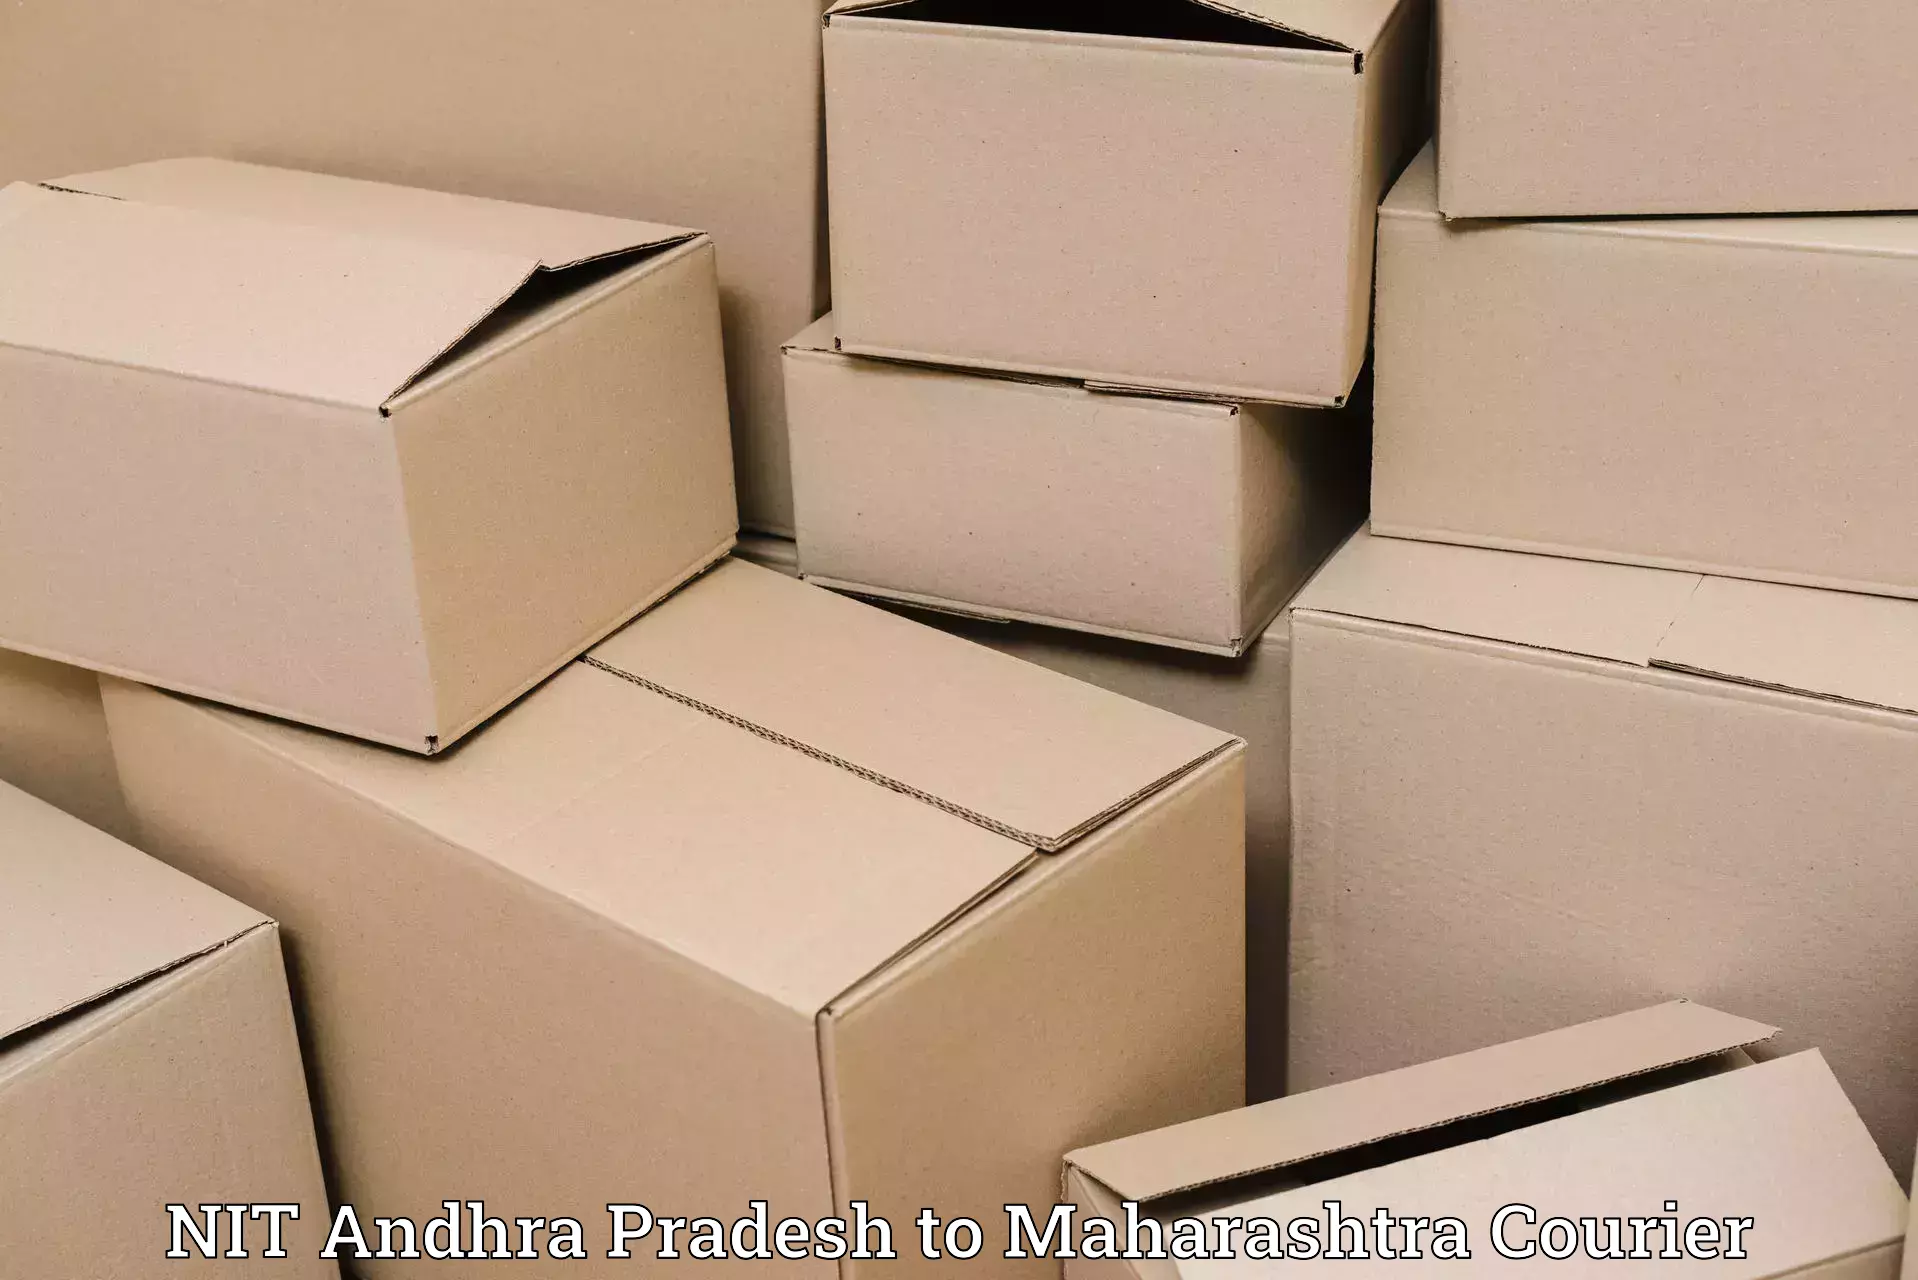 Reliable parcel services NIT Andhra Pradesh to Shirpur